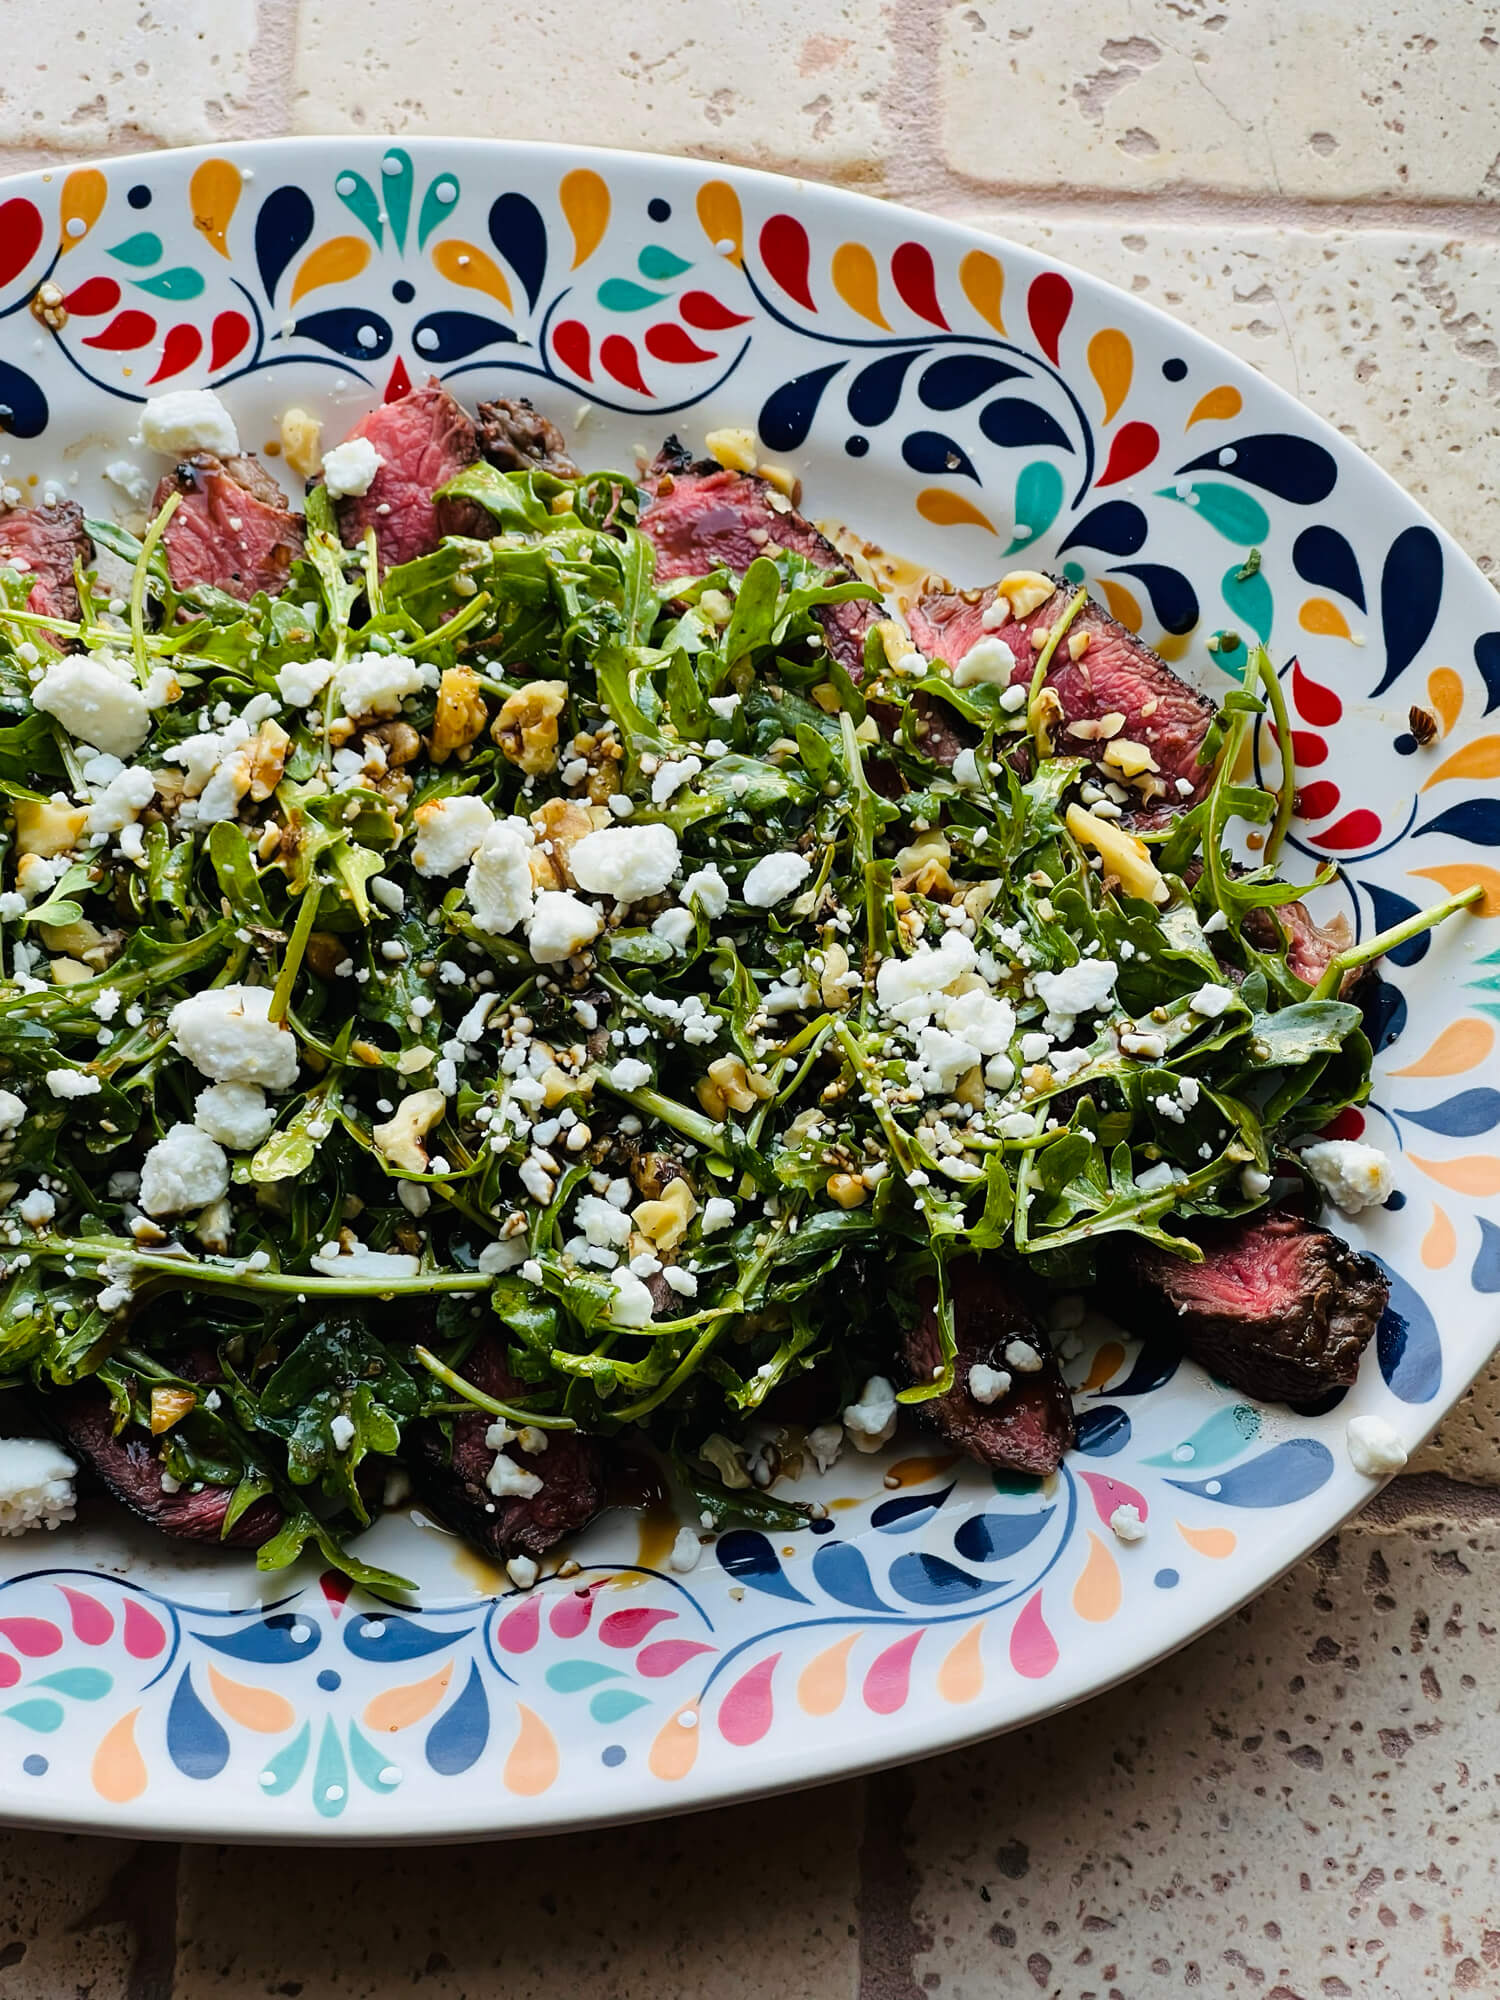 Steak Salad With Walnuts Goat Cheese And Pomegranate Molasses Dressing